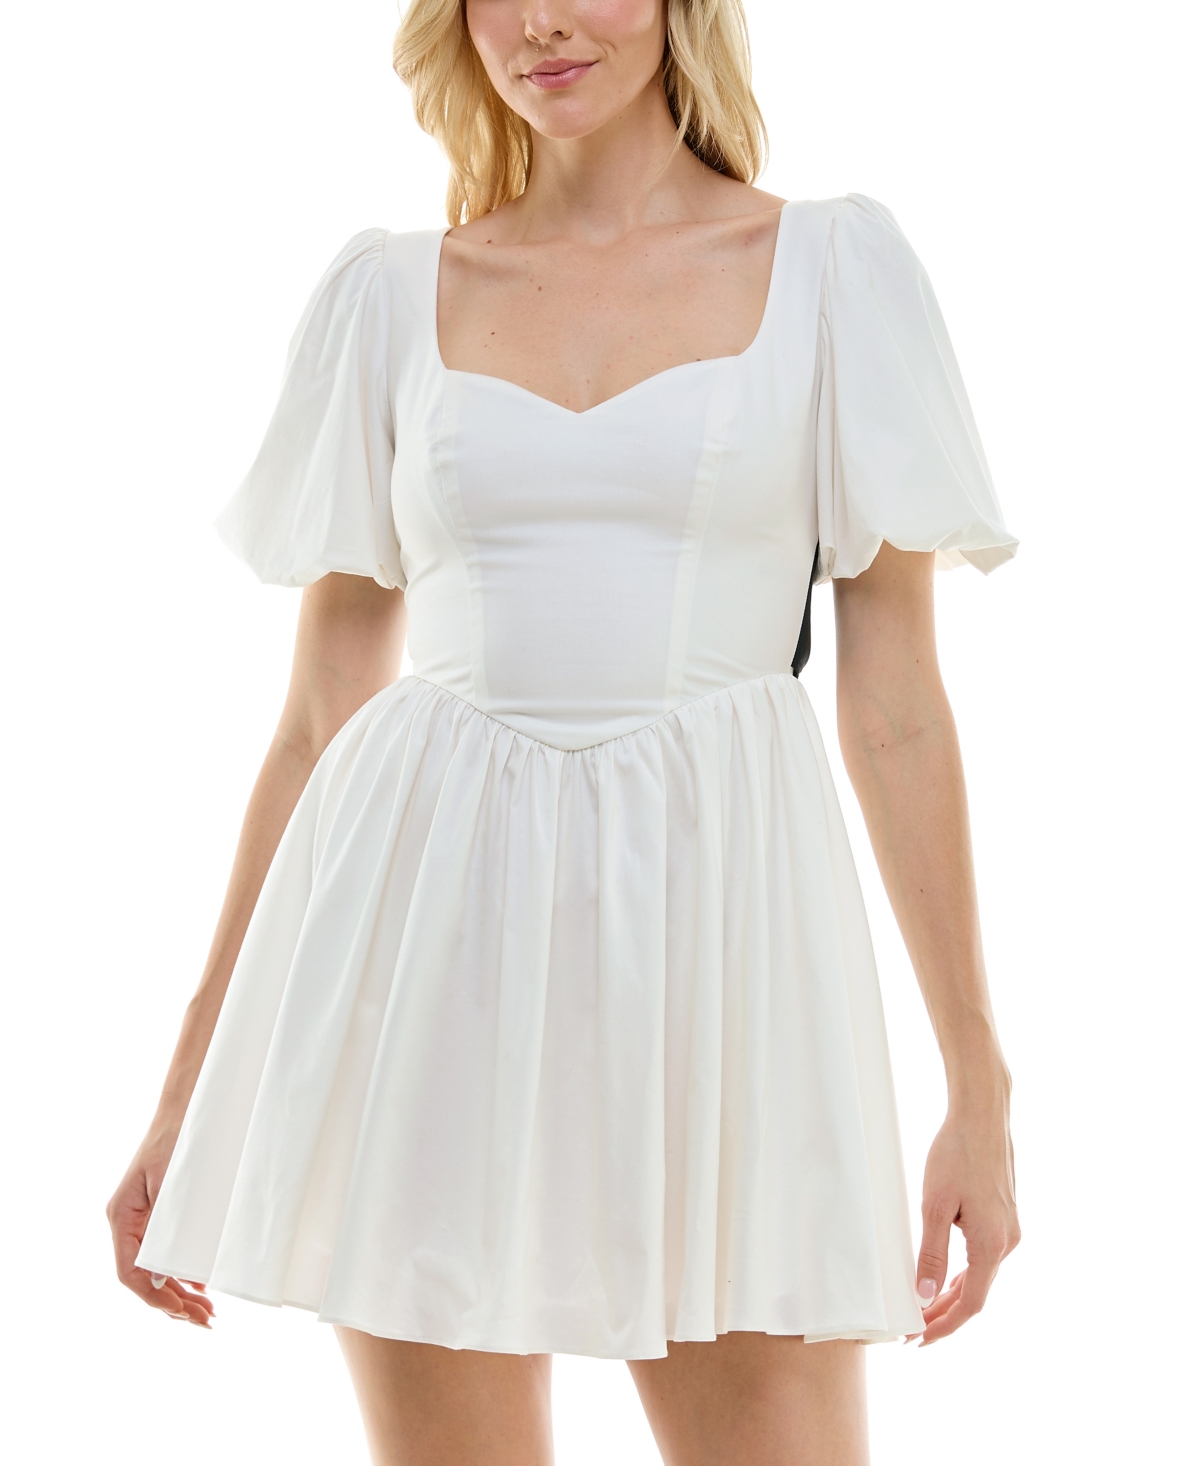 Juniors' Sweetheart-Neck Puff-Sleeve Fit & Flare Dress - White/blk